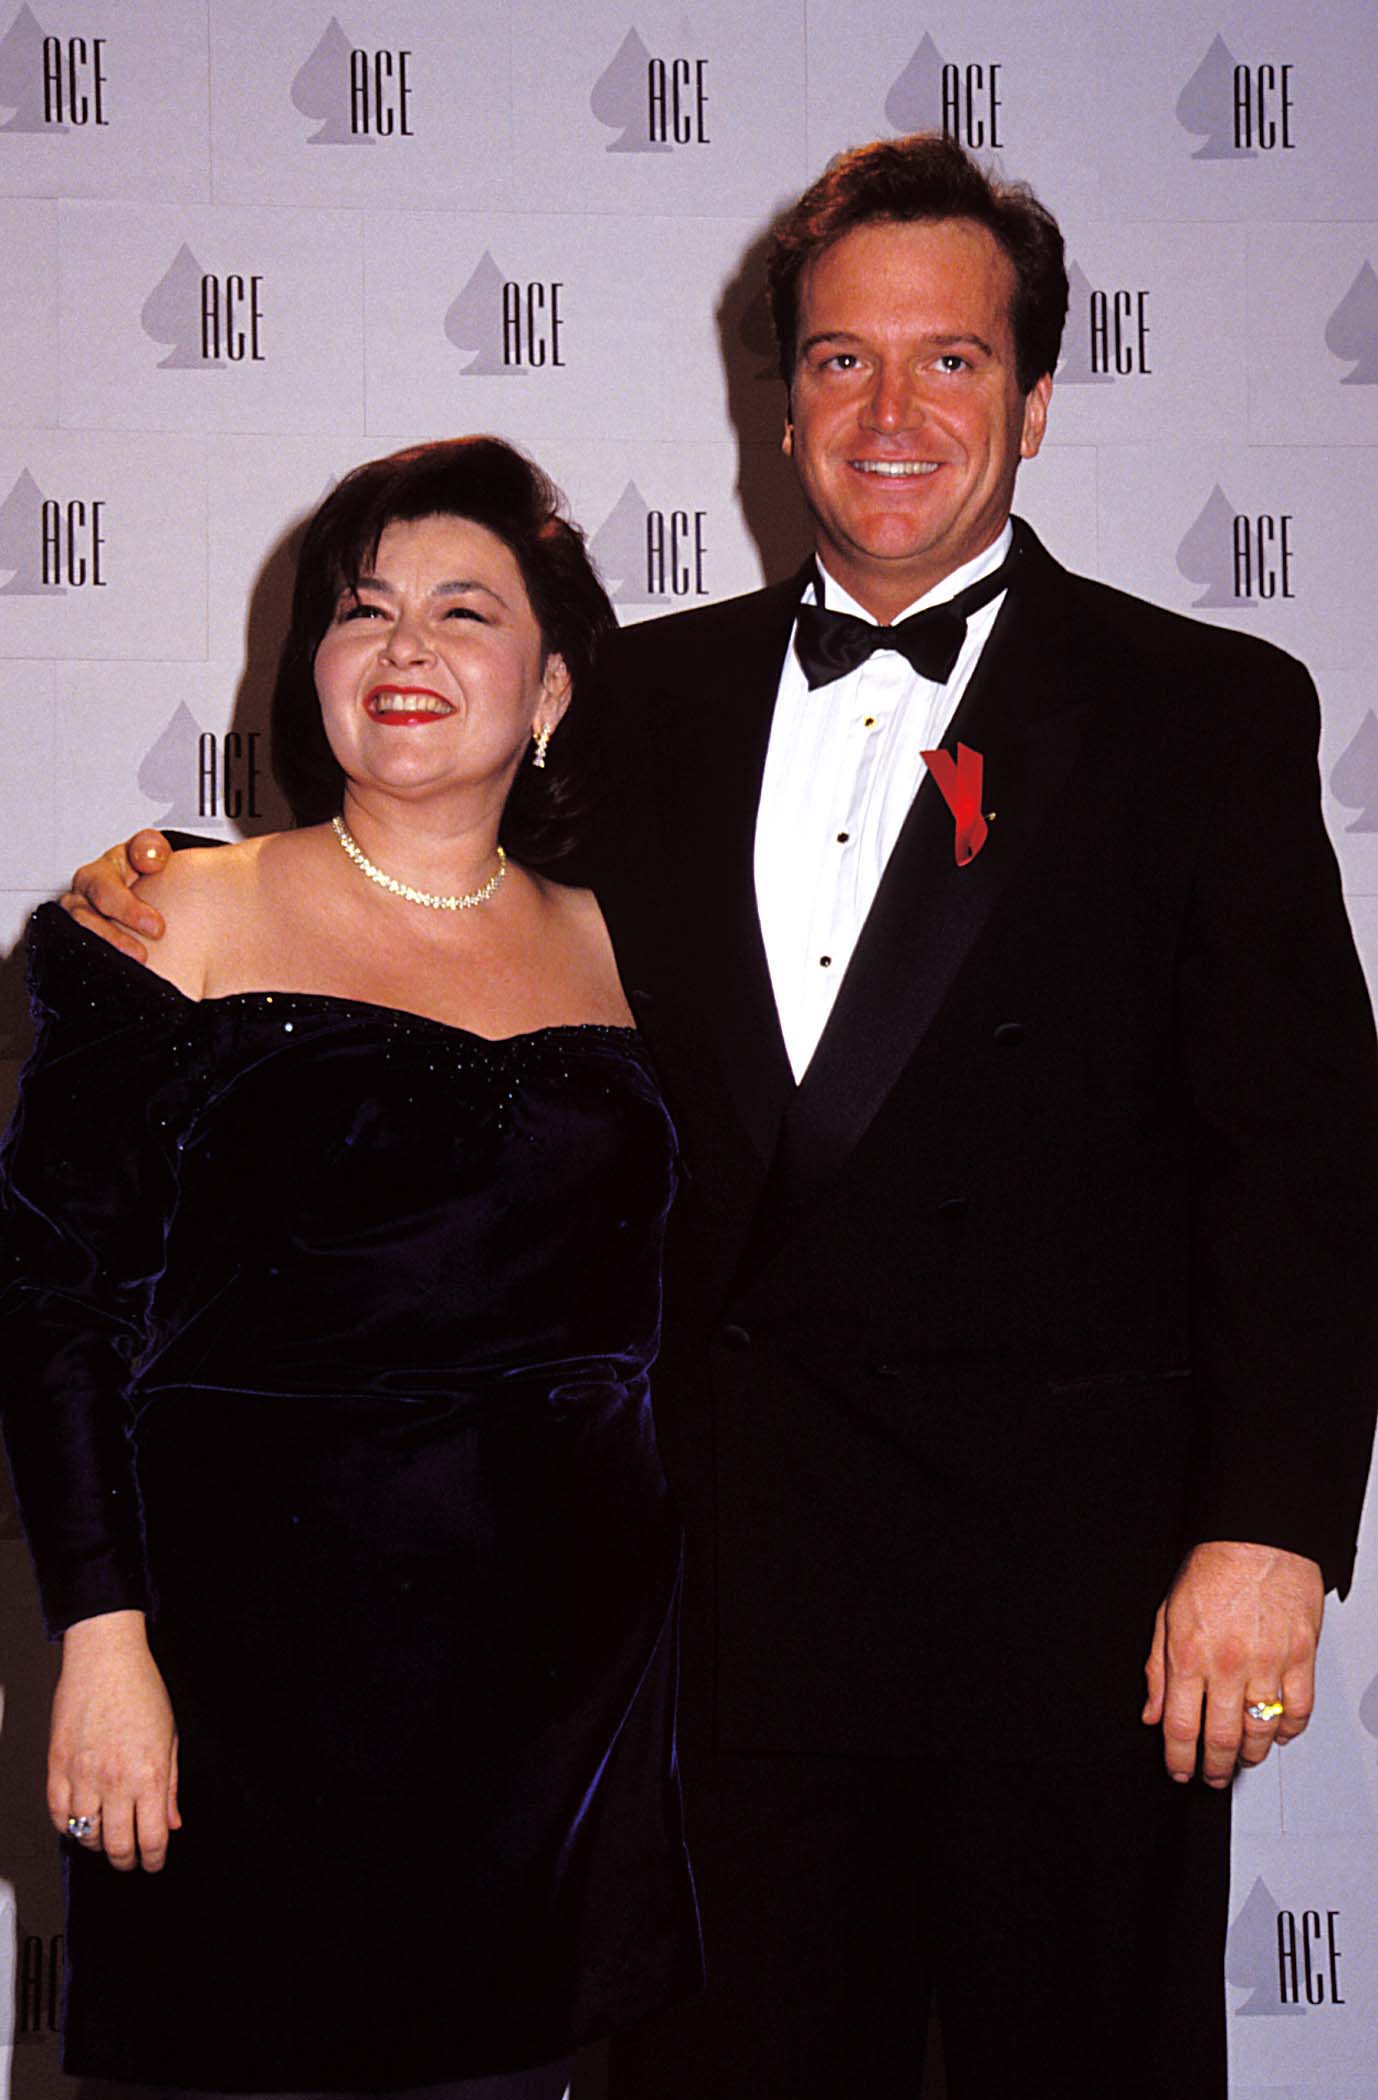 Roseanne Barr & Tom Arnold during 1992 Cable ACE Awards in Los Angeles, California, United States on January 9, 1992 | Source: Getty Images